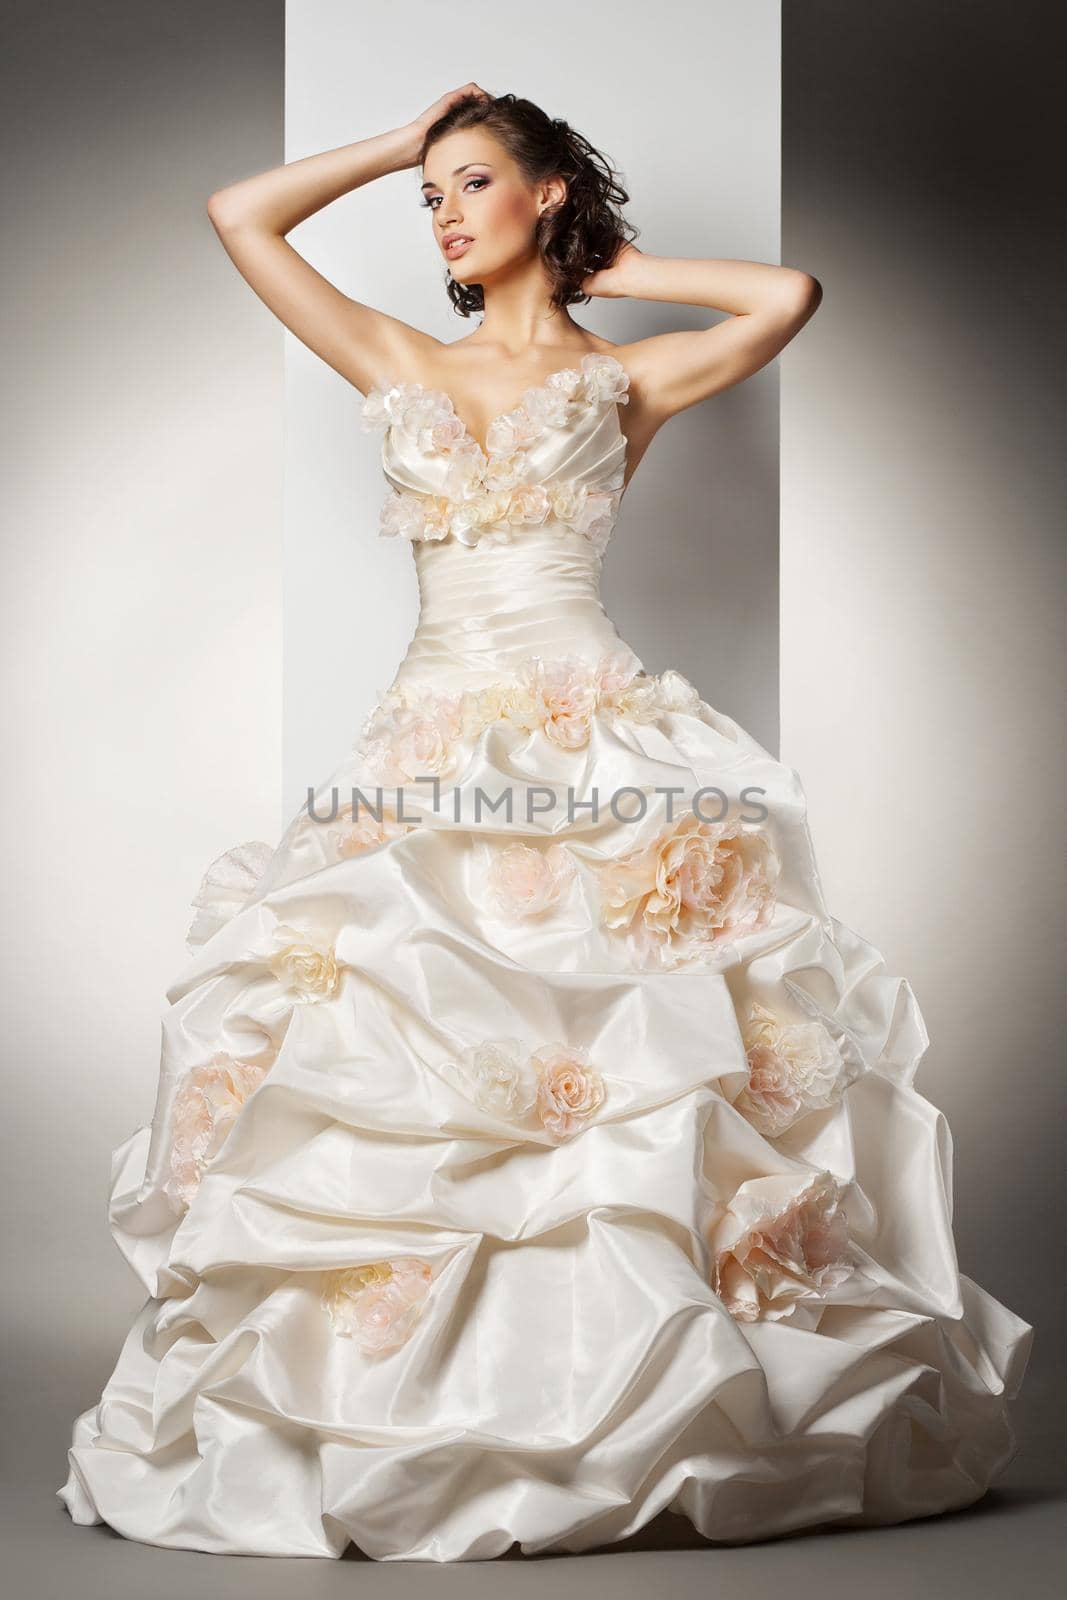 The beautiful young woman posing in a wedding dress over grey backround